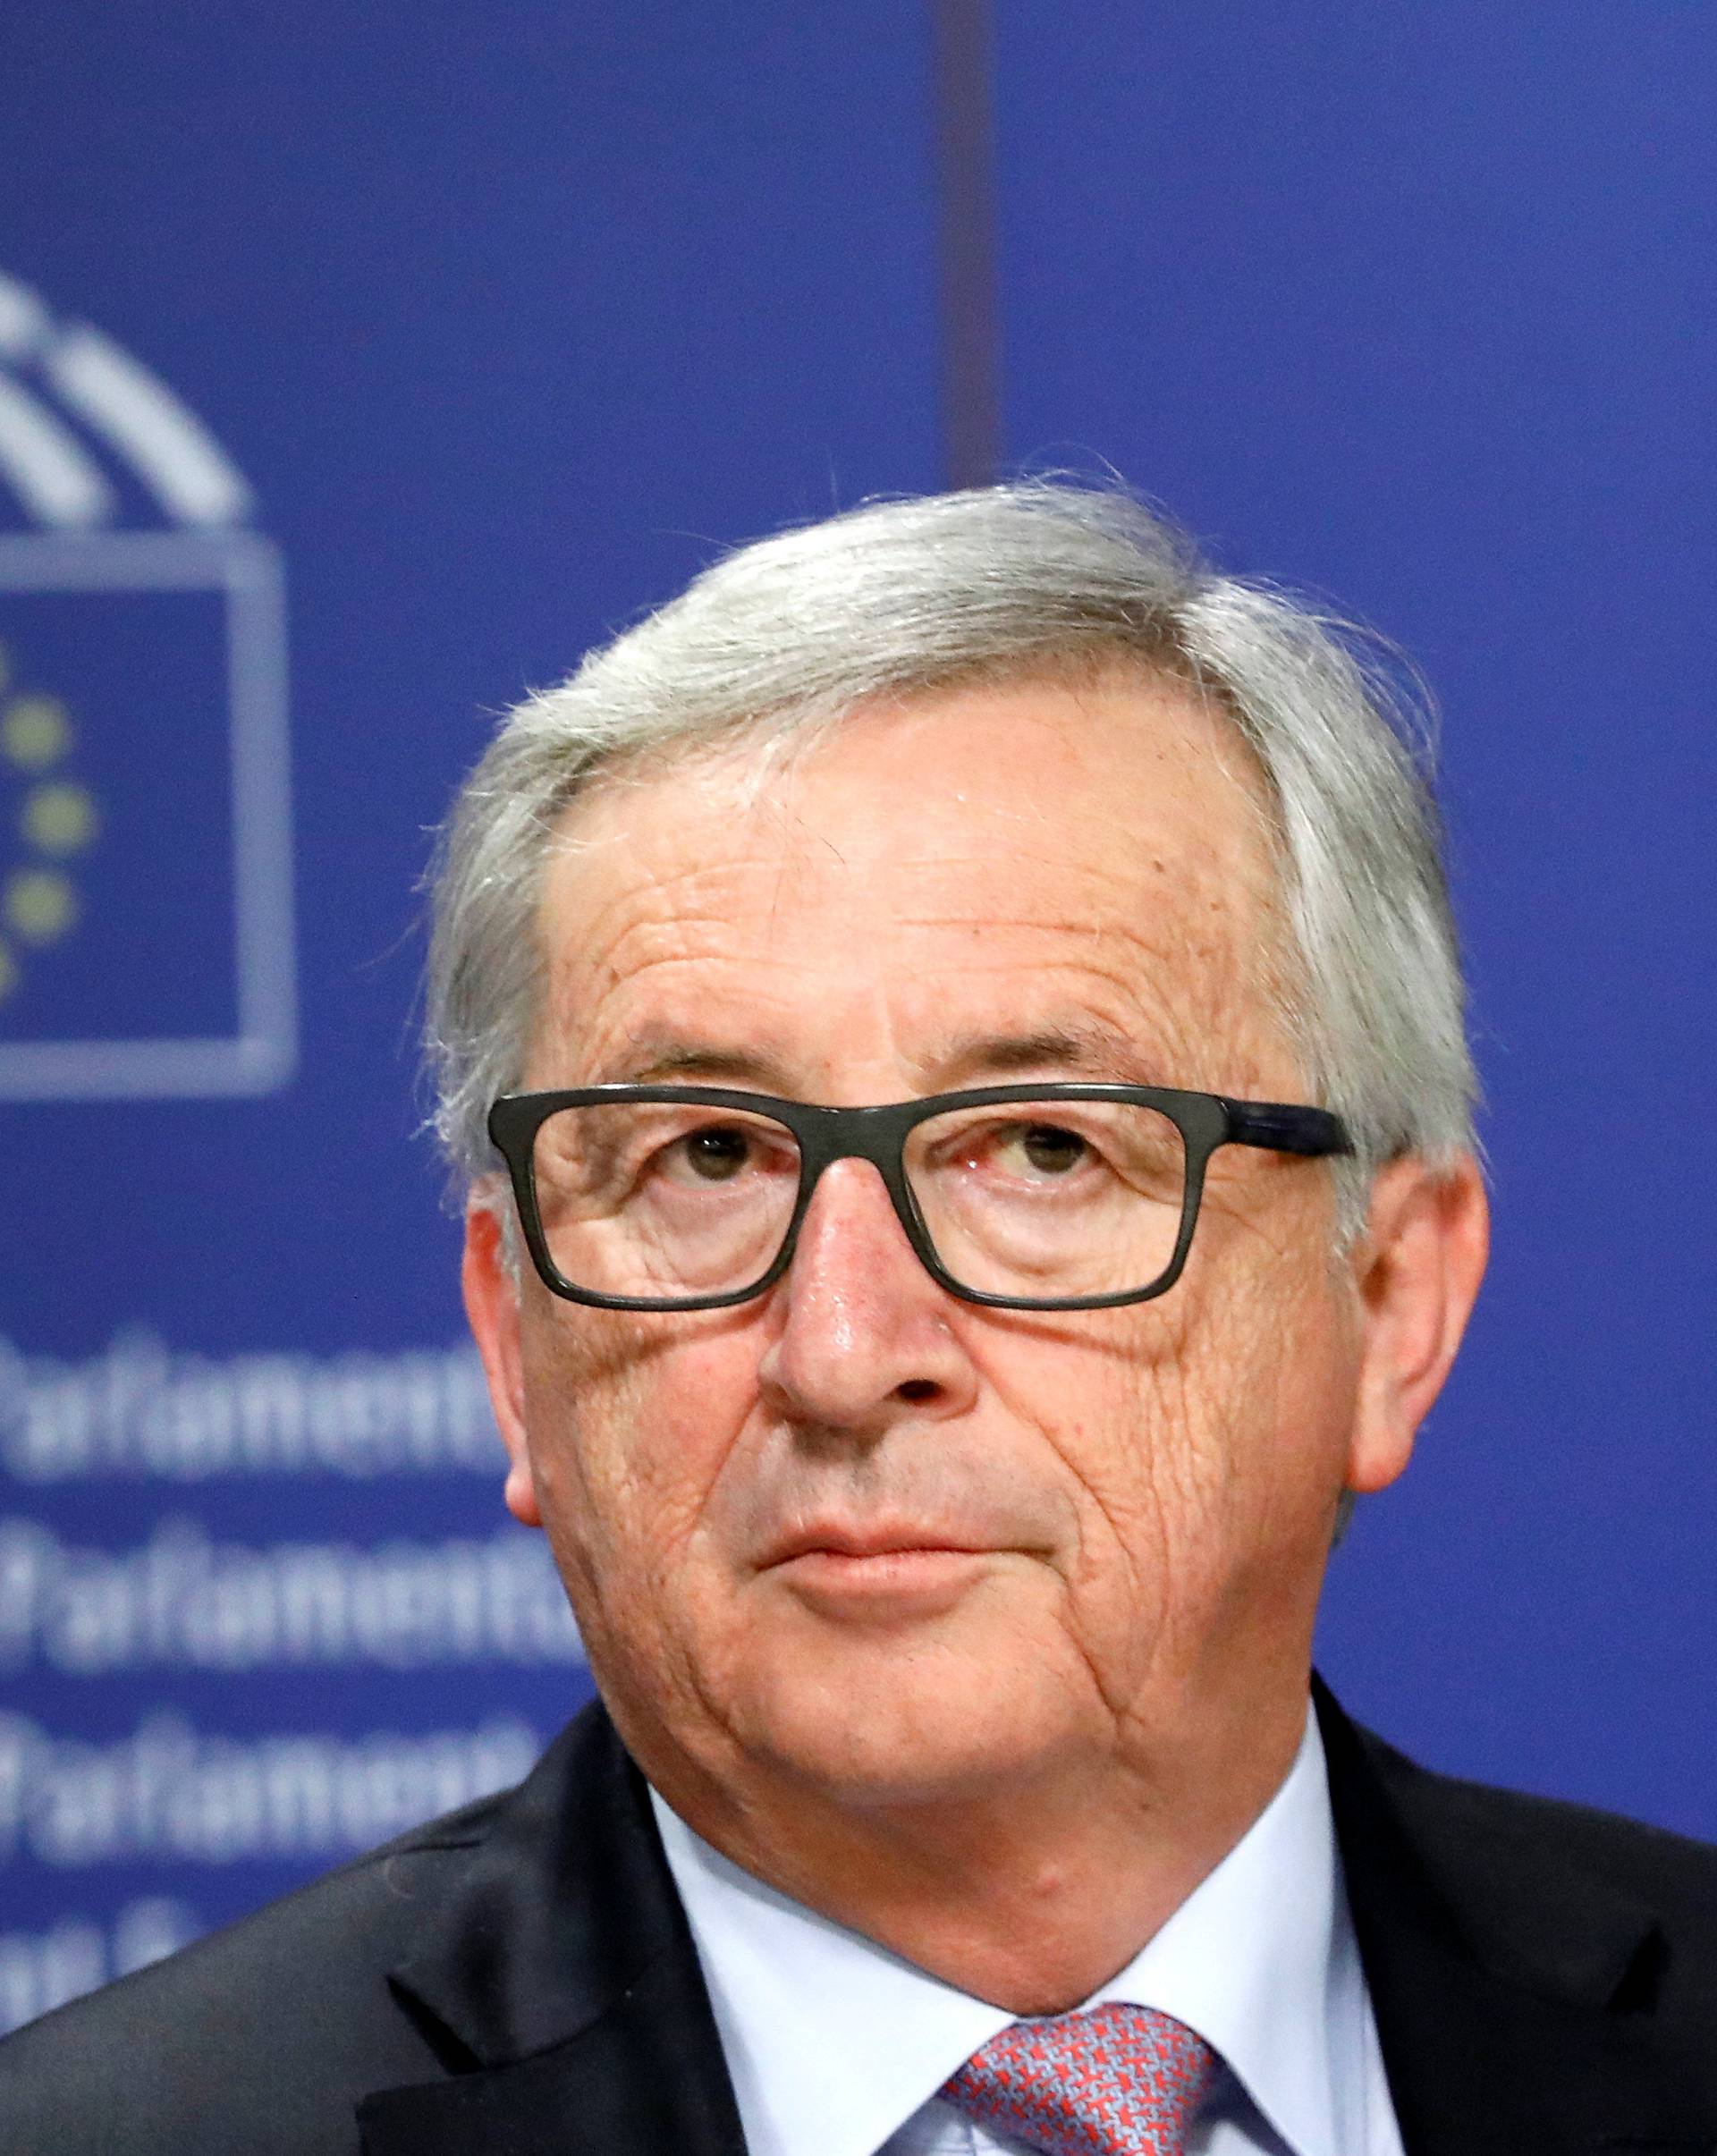 European Commission President Jean-Claude Juncker  attends a news conference after the presentation a White Paper on the Future of Europe in Brussels